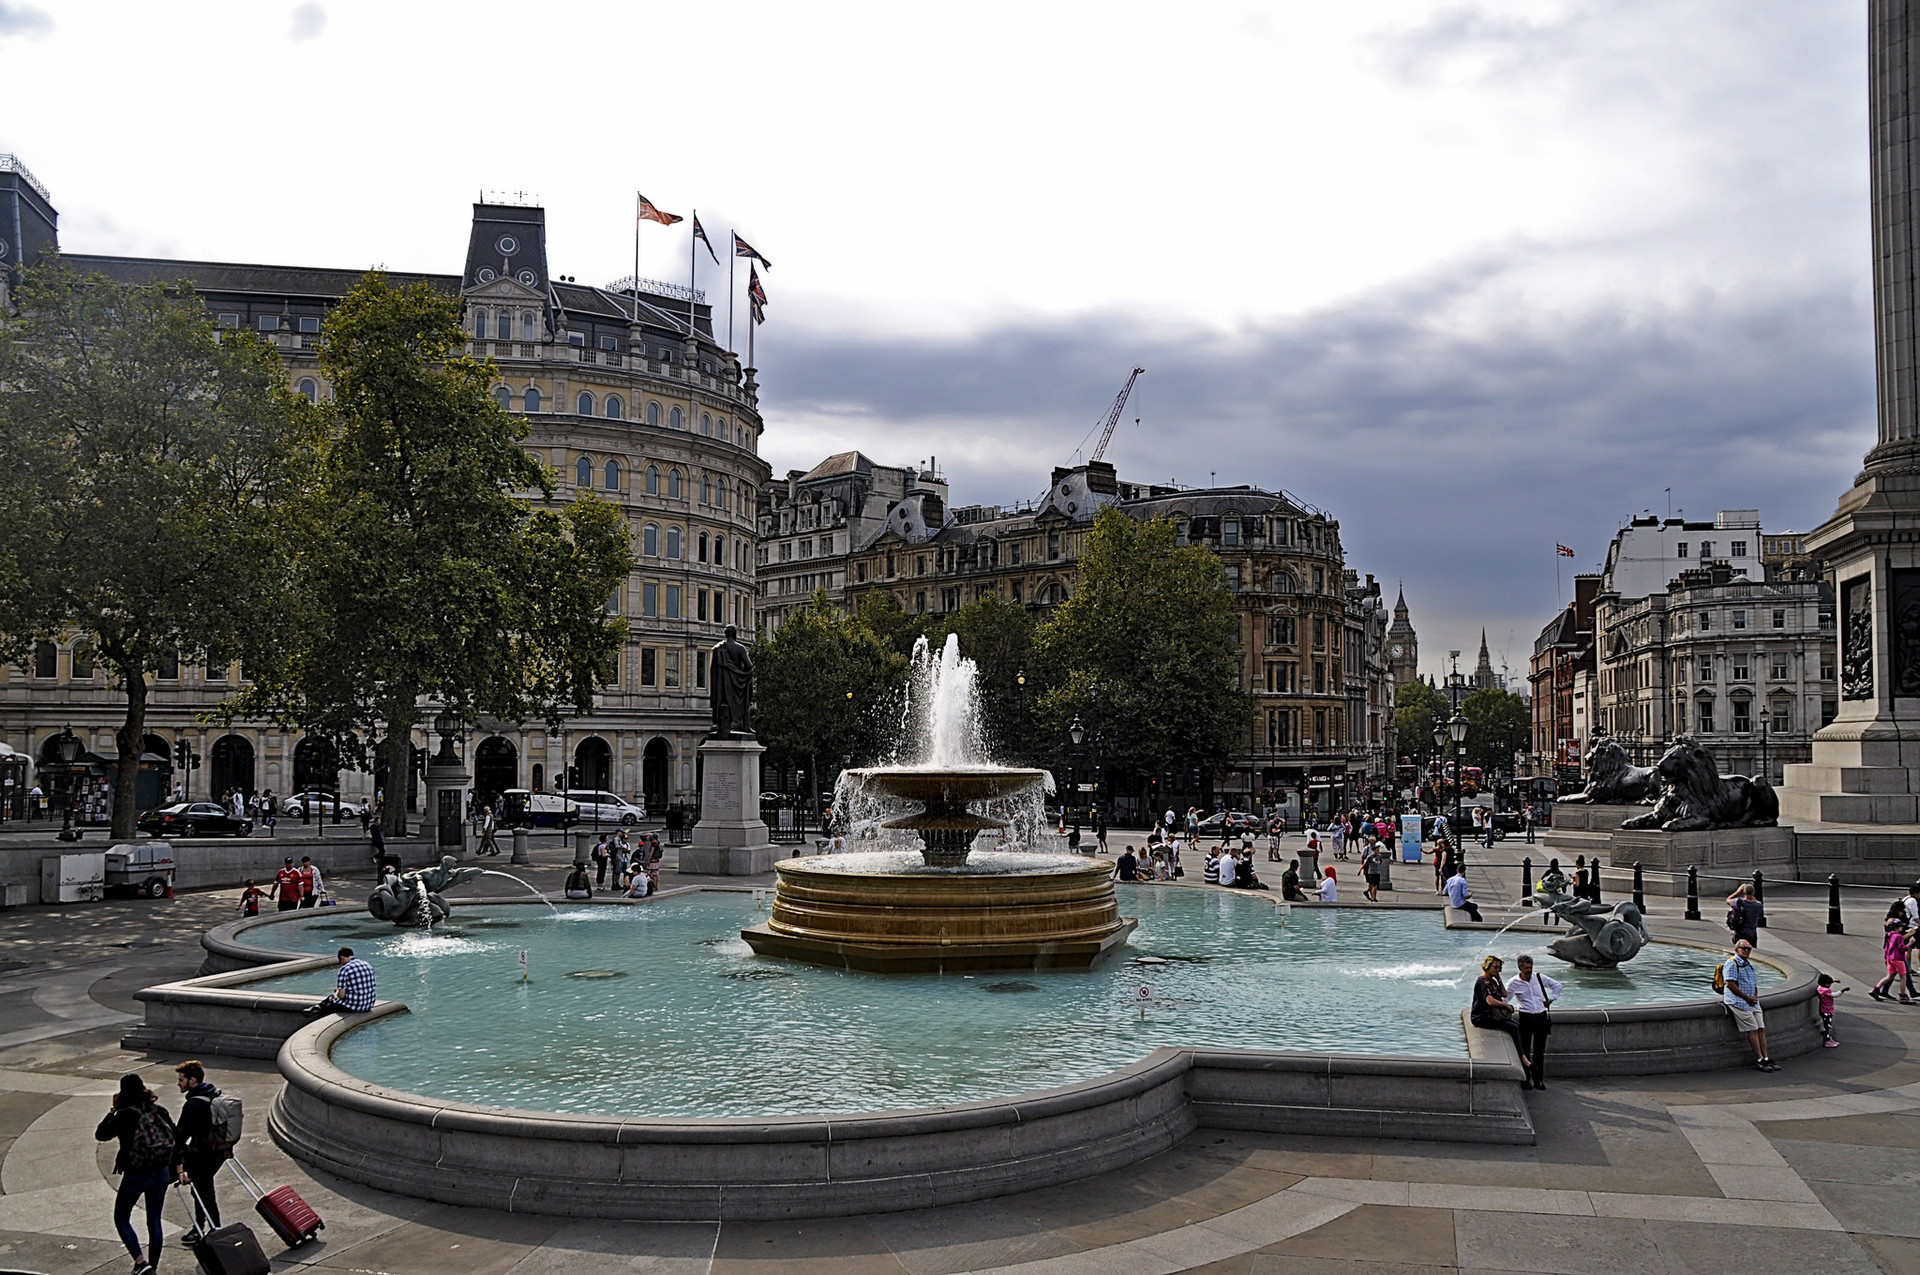 Trafalgar Square | What to see in London